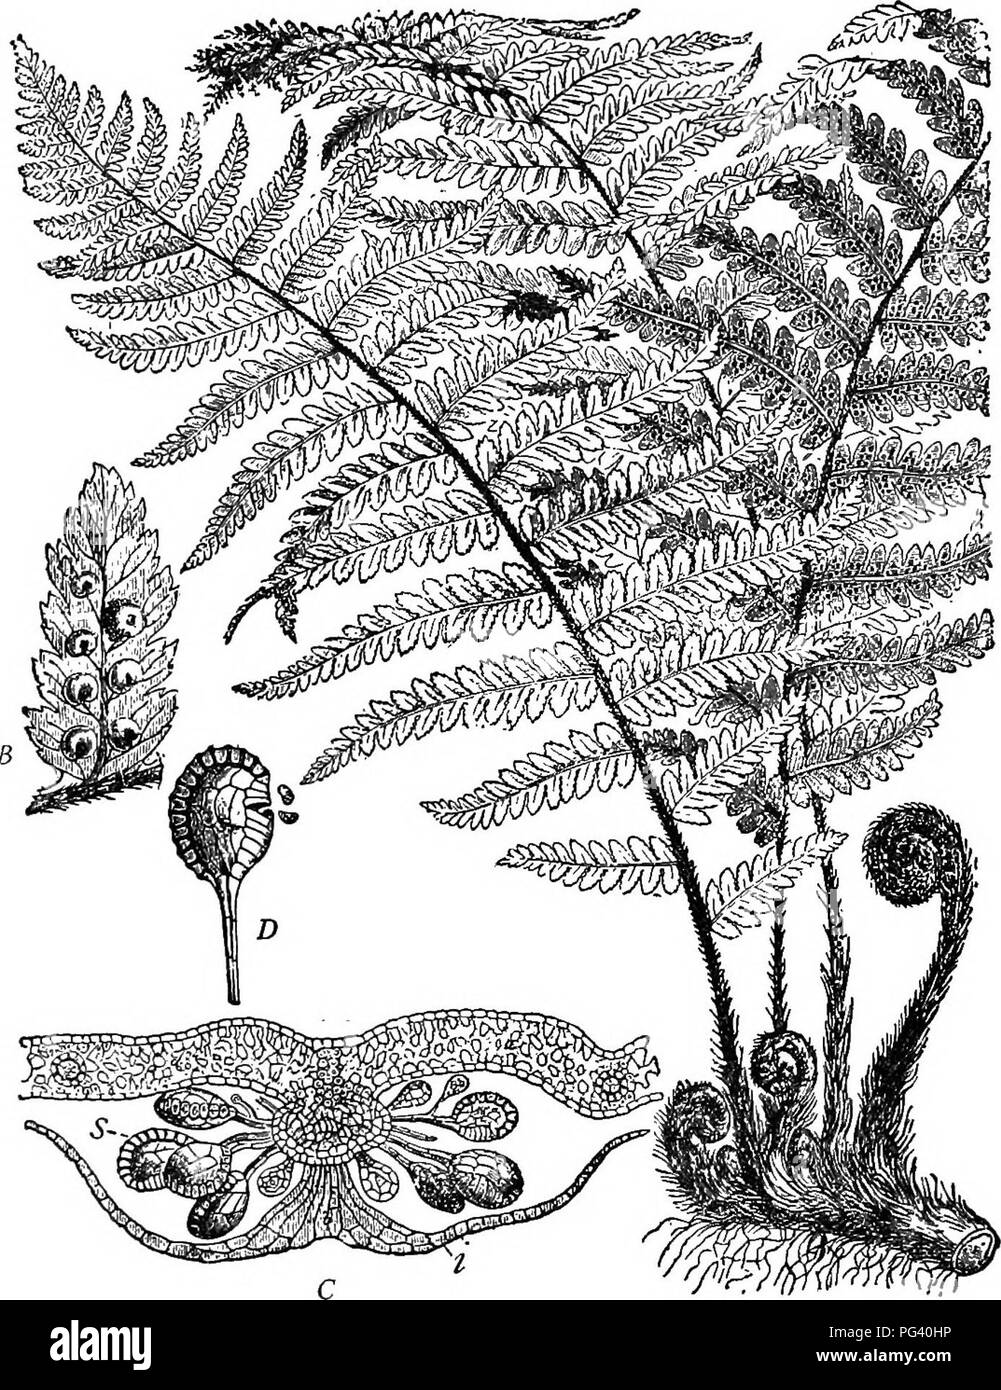 . Plant life and plant uses; an elementary textbook, a foundation for the study of agriculture, domestic science or college botany. Botany. 4i8 THE VASCULAR PLANTS. Fig. 209. — Aspidium, a common fern. A, the entire plant, showing the rhizome, the coiled young leaves arising from it, and three mature fronds, one of which shows sori as dark dots on the under surface. B, a leaflet, showing the shield- like coverings (indusia) of the sori. C, section through a sor'us and the leaf which bears it, as seen through a microscope; i, the indusium; s, the sporangia. D, a sporangium, showing the annulus  Stock Photo